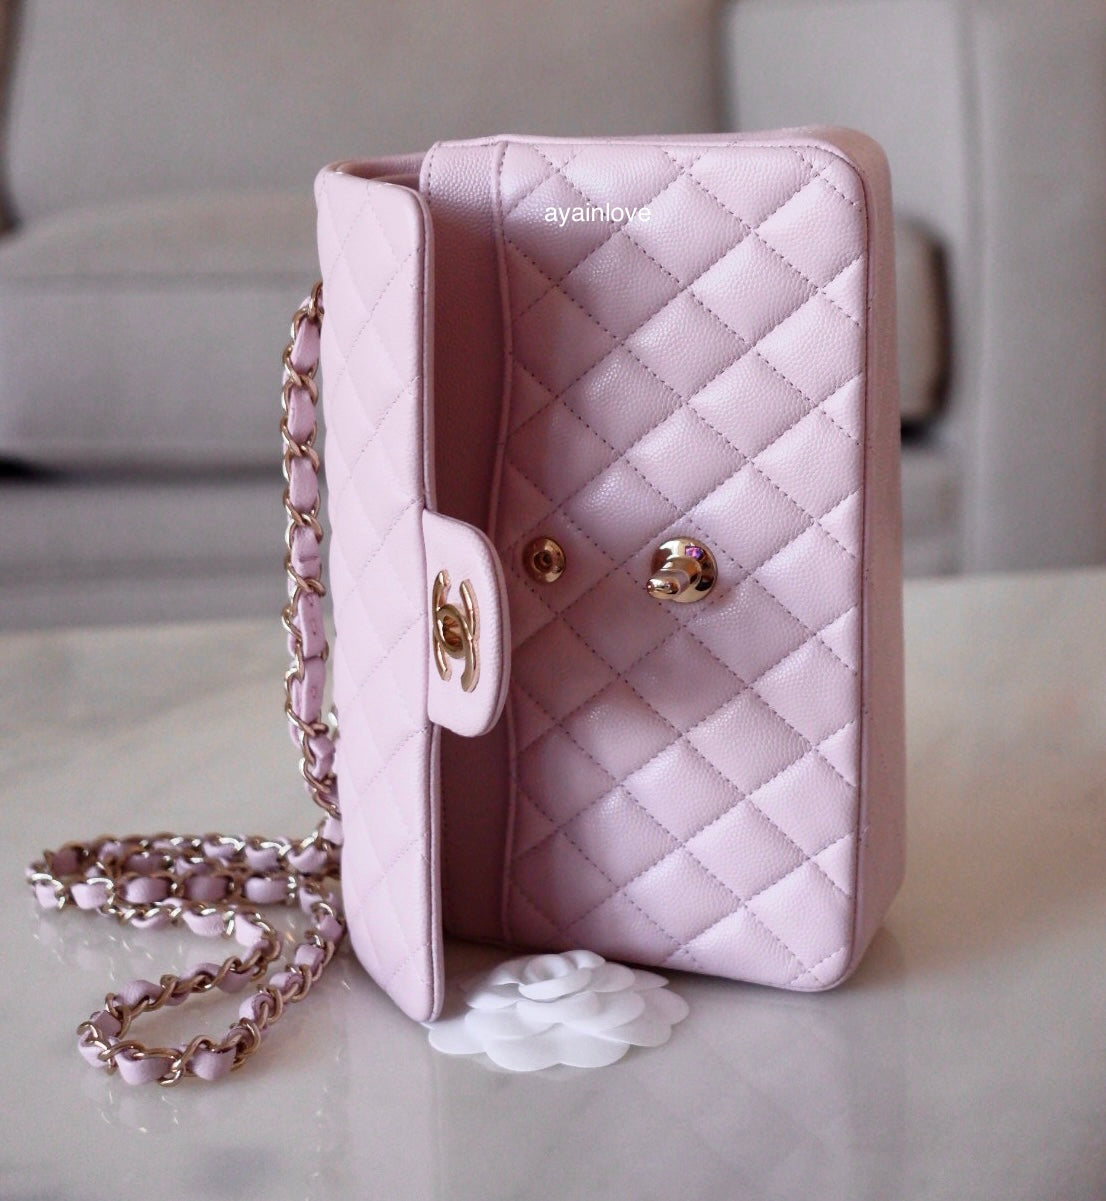 Chanel Small Classic Flap Bag